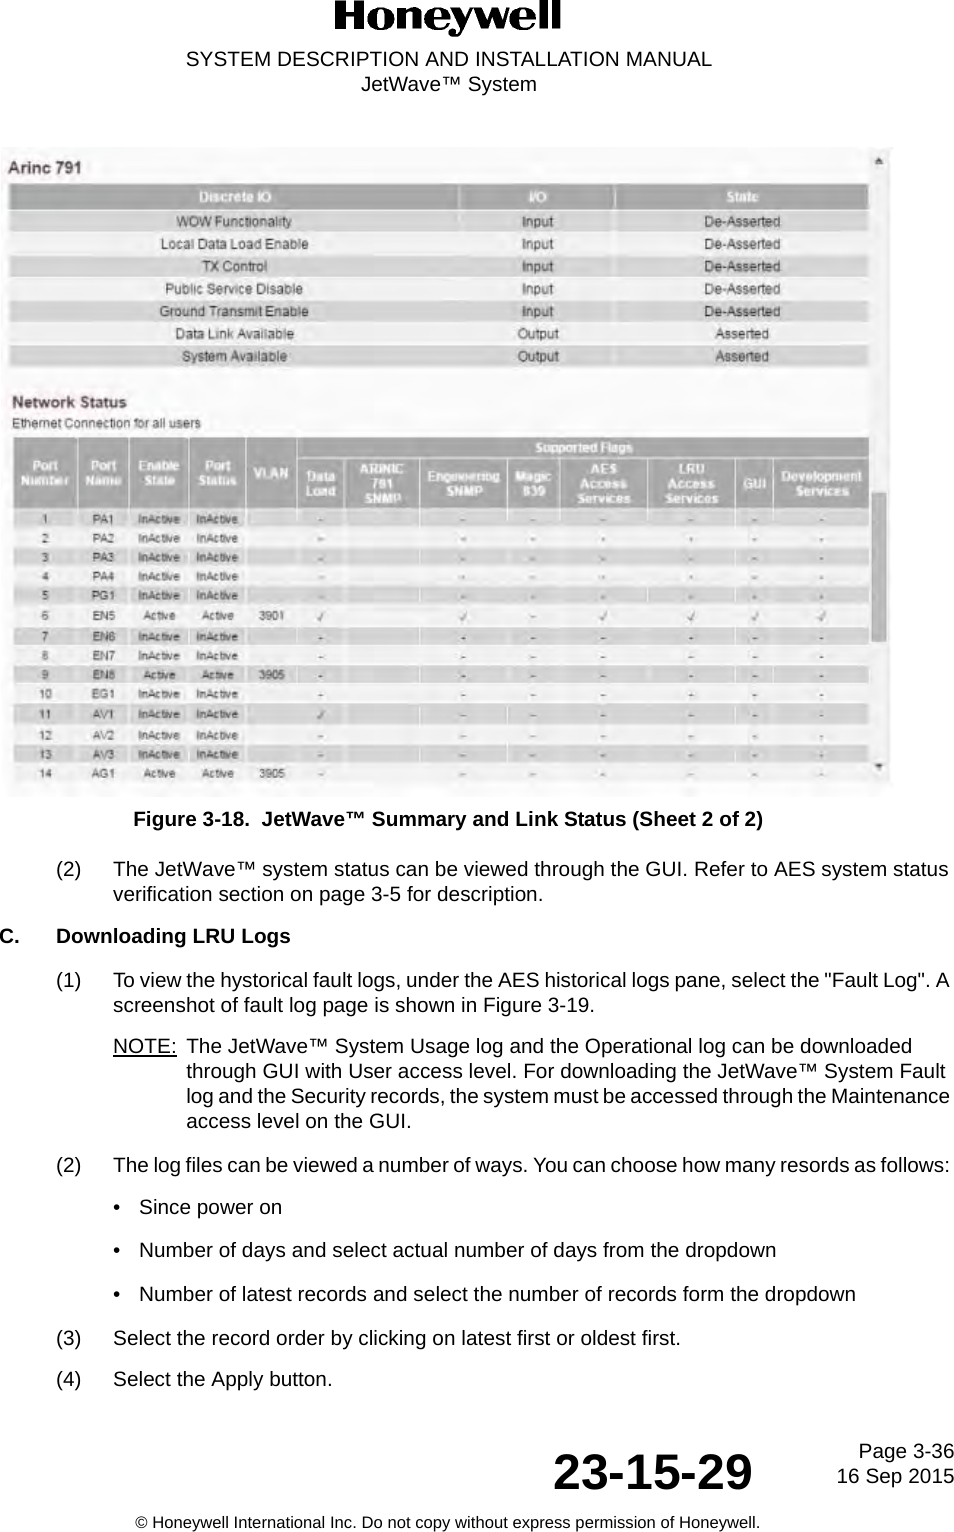 Page 3-3616 Sep 201523-15-29SYSTEM DESCRIPTION AND INSTALLATION MANUALJetWave™ System© Honeywell International Inc. Do not copy without express permission of Honeywell.Figure 3-18.  JetWave™ Summary and Link Status (Sheet 2 of 2)(2) The JetWave™ system status can be viewed through the GUI. Refer to AES system status verification section on page 3-5 for description.C. Downloading LRU Logs(1) To view the hystorical fault logs, under the AES historical logs pane, select the &quot;Fault Log&quot;. A screenshot of fault log page is shown in Figure 3-19.NOTE: The JetWave™ System Usage log and the Operational log can be downloaded through GUI with User access level. For downloading the JetWave™ System Fault log and the Security records, the system must be accessed through the Maintenance access level on the GUI.(2) The log files can be viewed a number of ways. You can choose how many resords as follows: • Since power on• Number of days and select actual number of days from the dropdown• Number of latest records and select the number of records form the dropdown(3) Select the record order by clicking on latest first or oldest first.(4) Select the Apply button.   